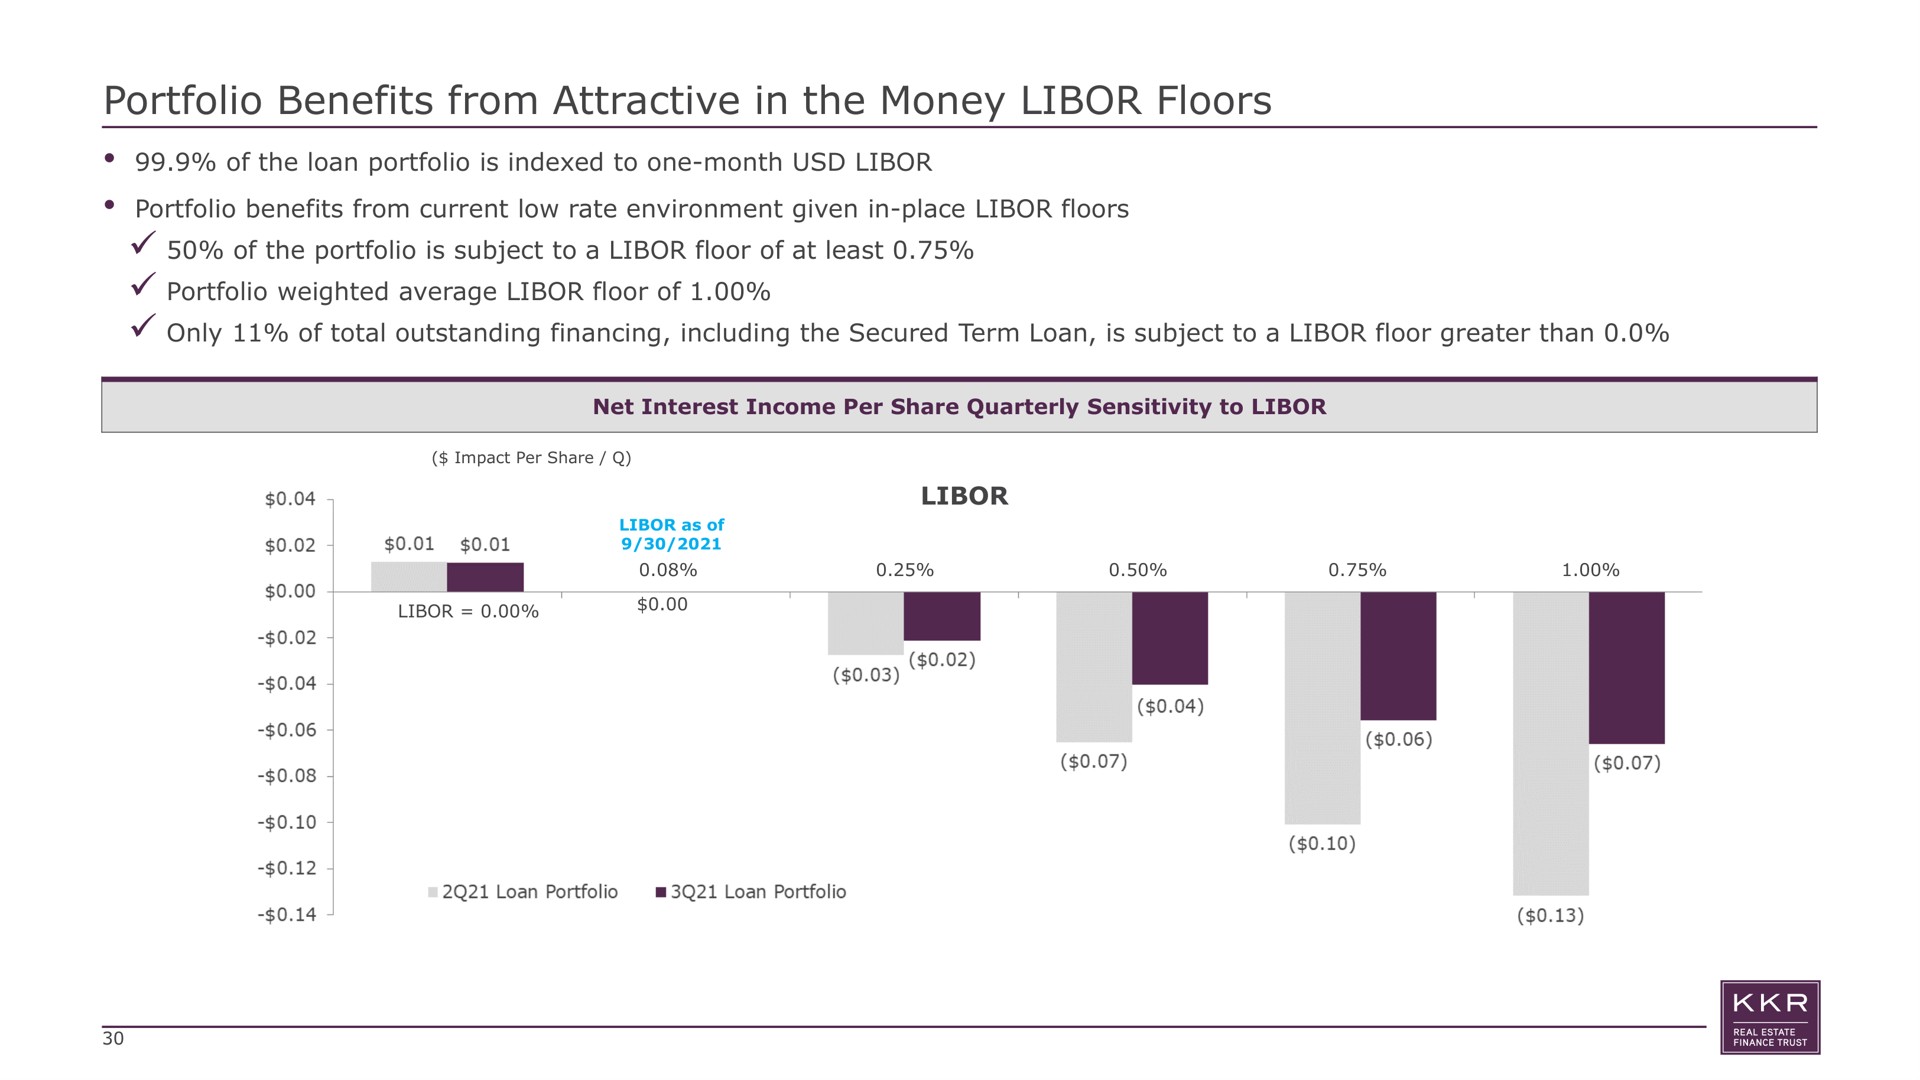 portfolio benefits from attractive in the money floors of the loan portfolio is indexed to one month portfolio benefits from current low rate environment given in place floors of the portfolio is subject to a floor of at least portfolio weighted average floor of only of total outstanding financing including the secured term loan is subject to a floor greater than | KKR Real Estate Finance Trust